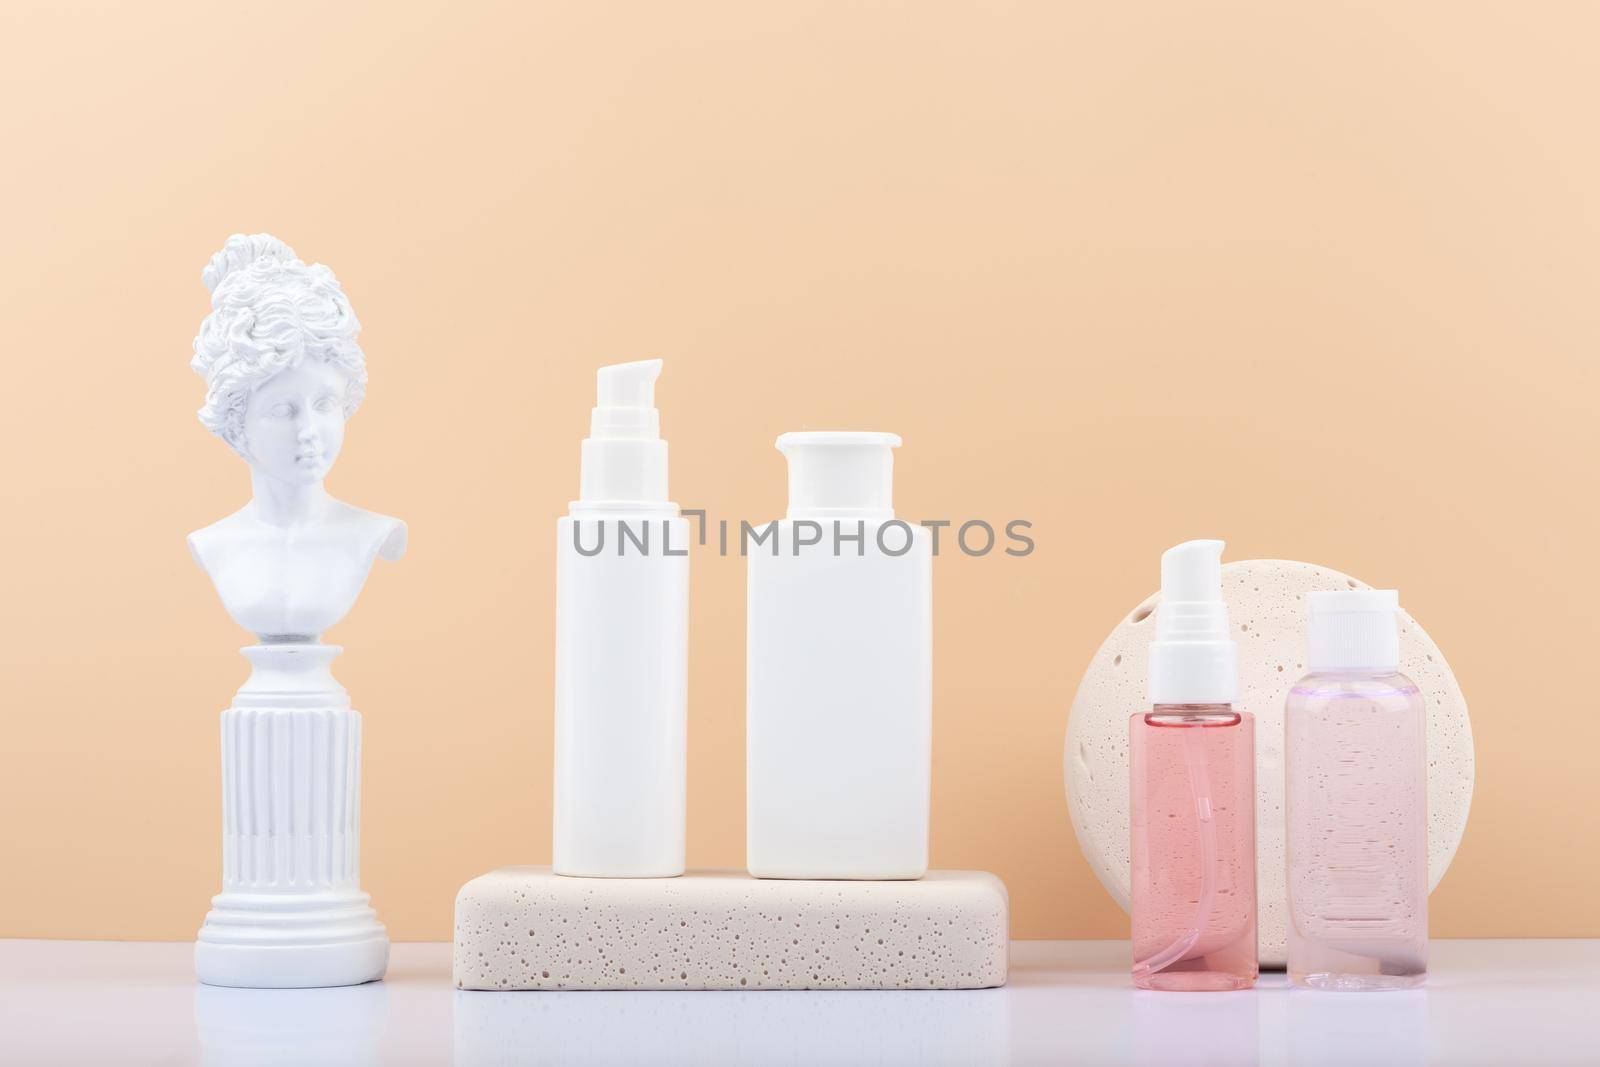 Set of cosmetic products with gypsum figure on white table against beige background. White unbranded cosmetic tubes in a row. Concept of skin care and beauty